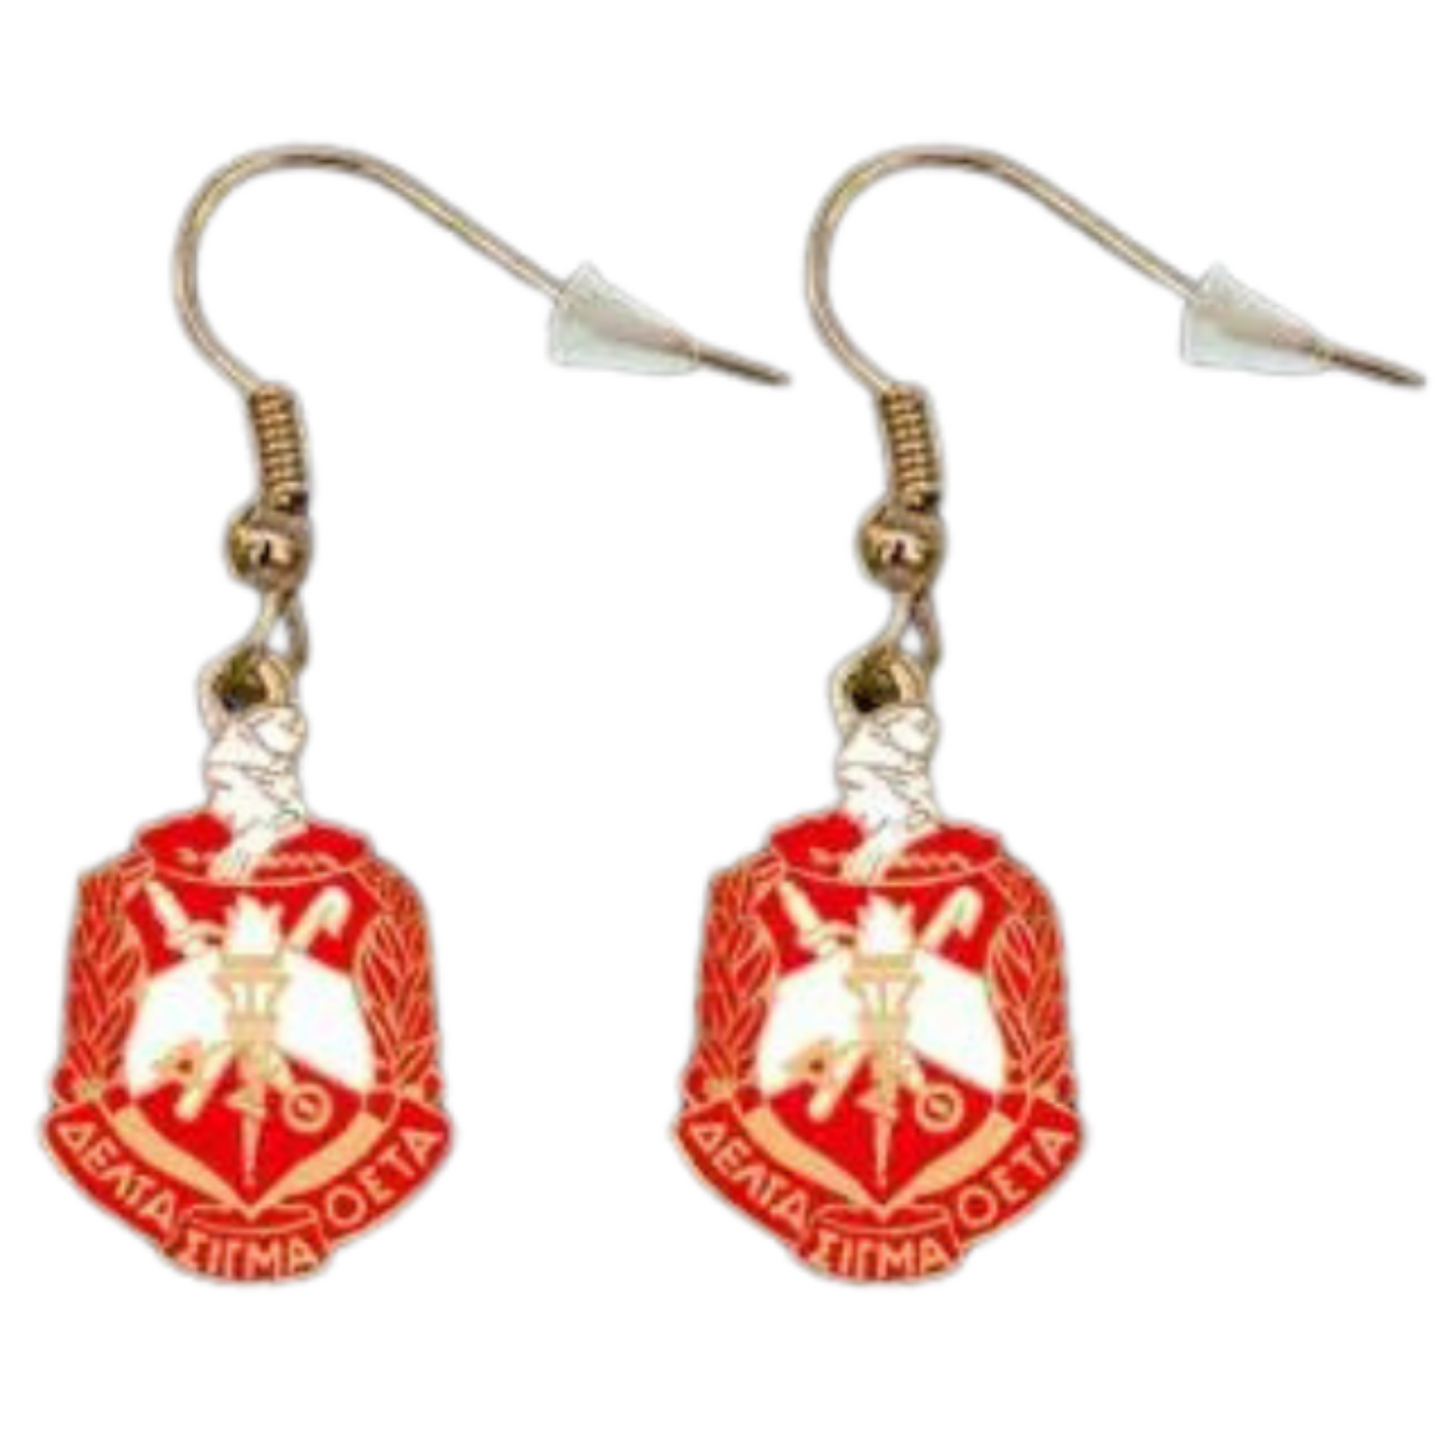 DST Red Shield Earrings red gold and white